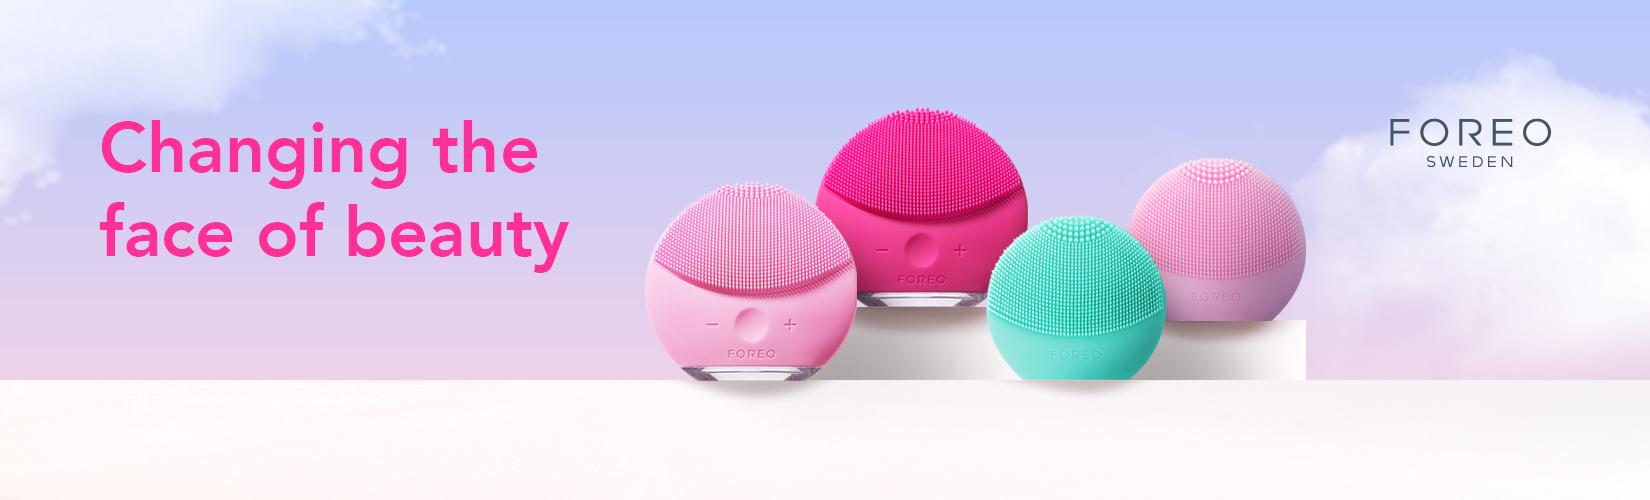 Foreo. Changing the face of beauty.